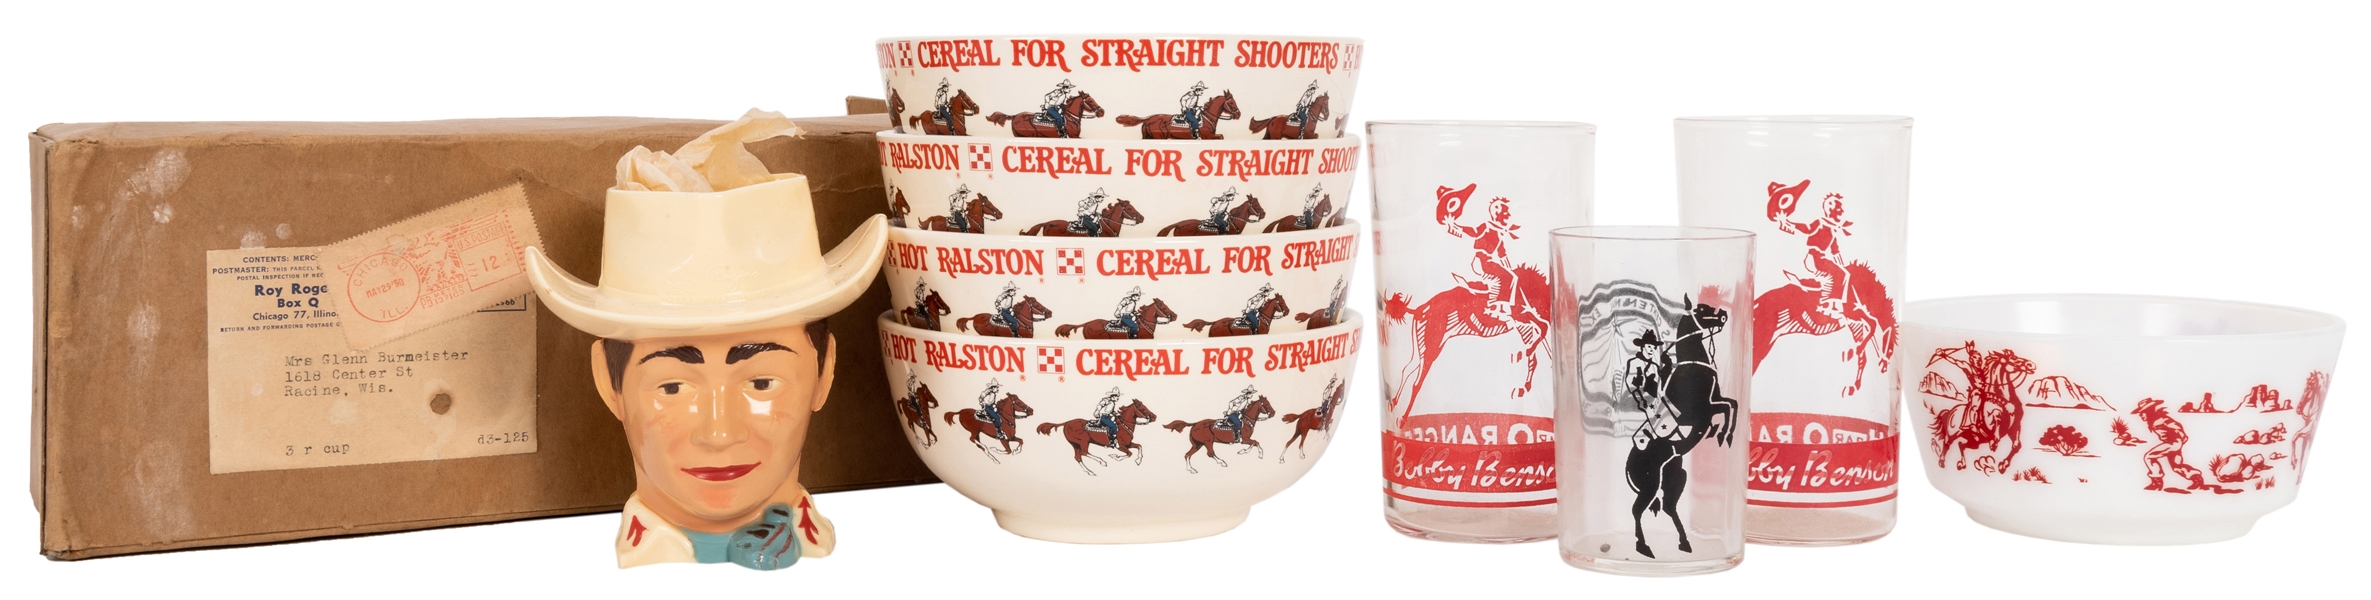  Collection of Western Themed Breakfast Cereal Glassware Premiums. 10 pcs. 